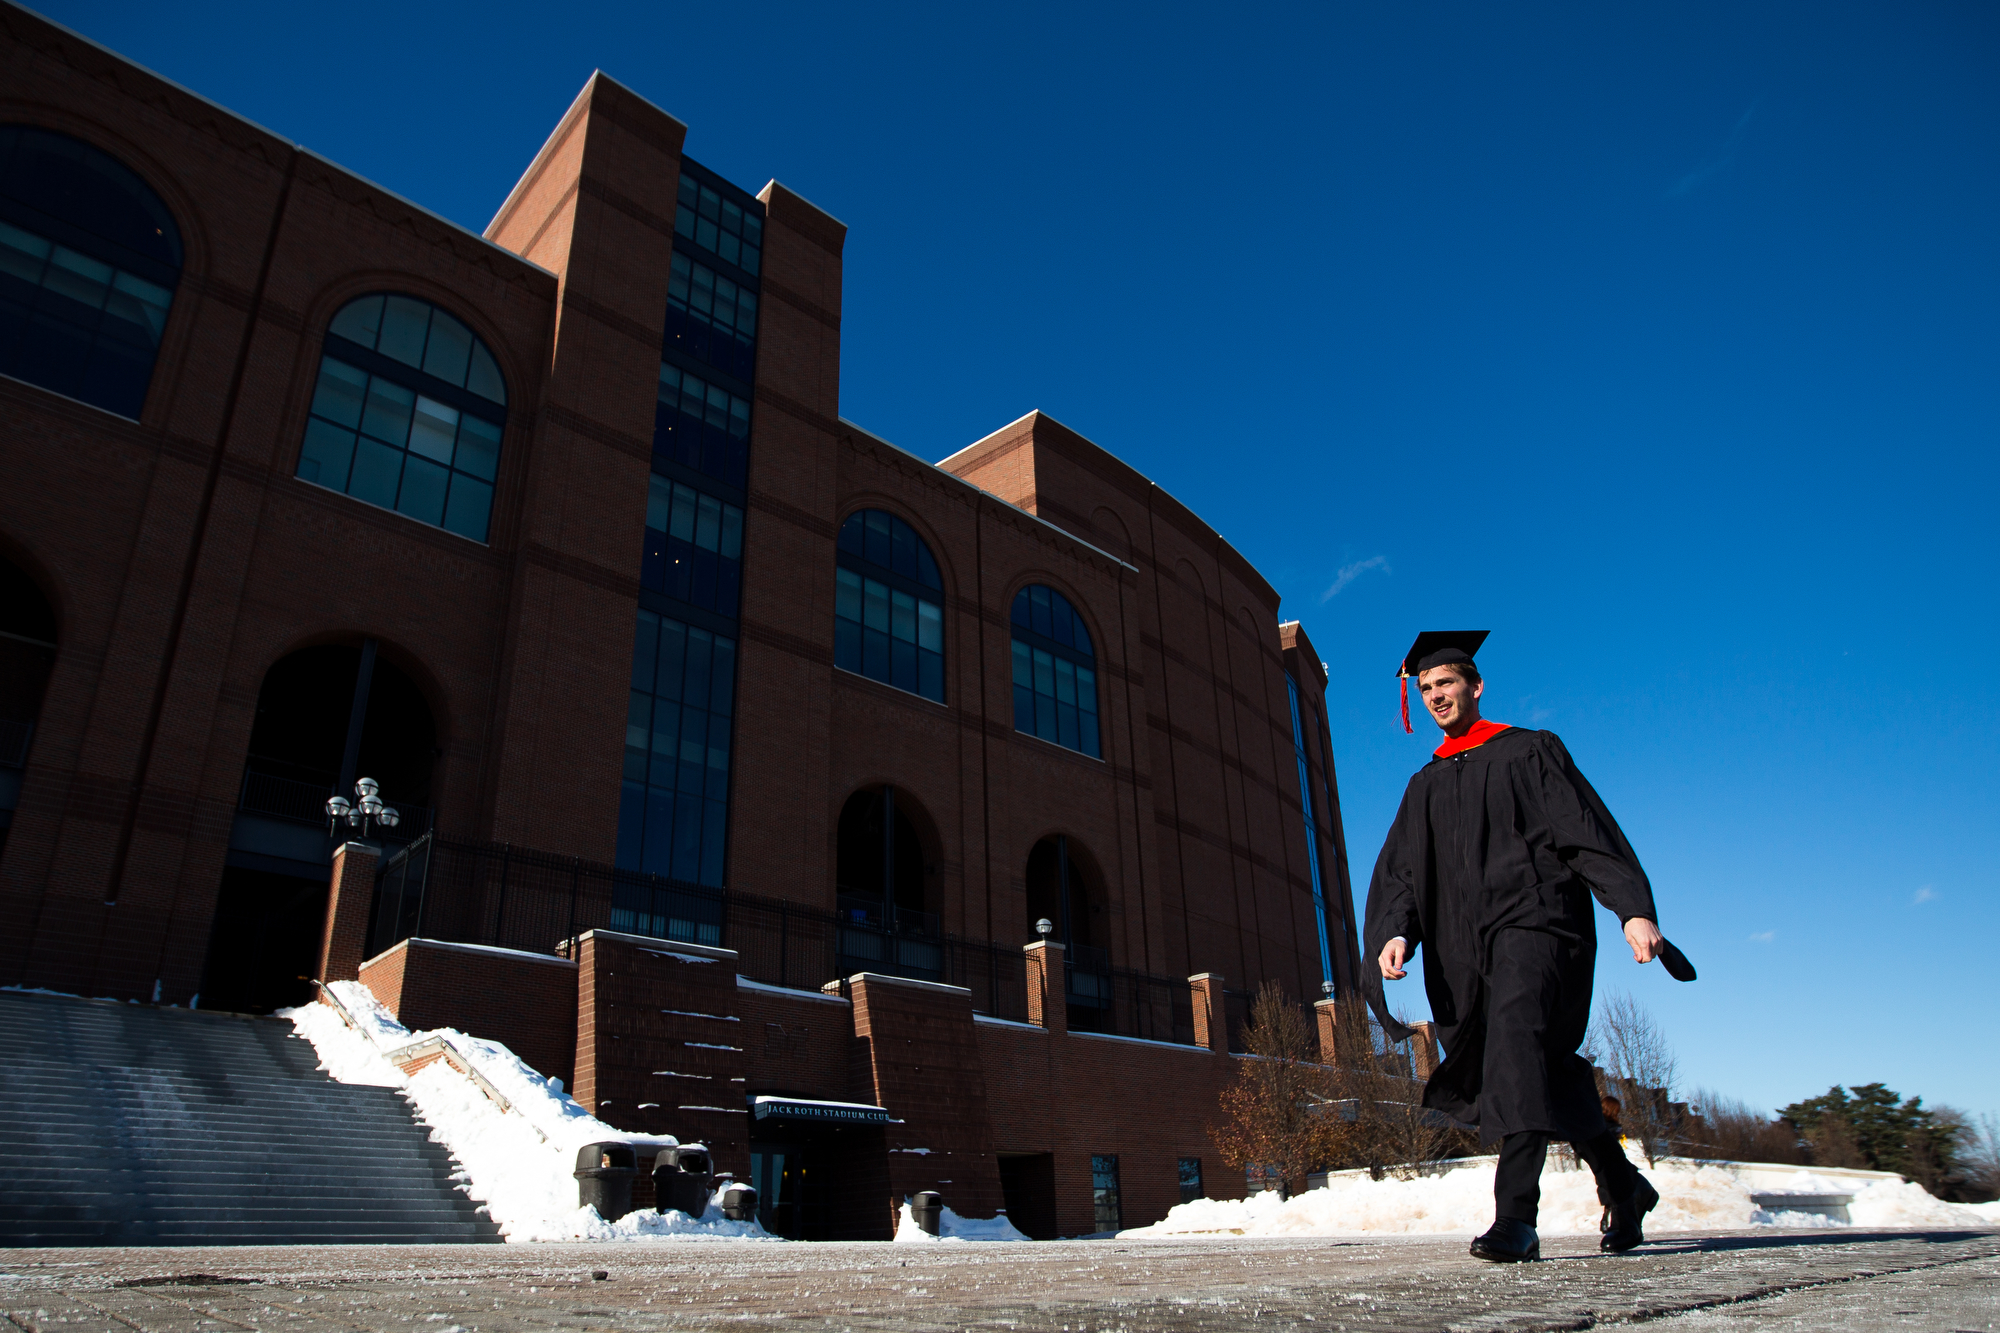  Florian Jule, graduating with a masters of science in aerospace engineering, walks past Michigan stadium before the University of Michigan winter commencement on Sunday, December 18, 2016. Jule and about 1,000 other students graduated at the Crisler